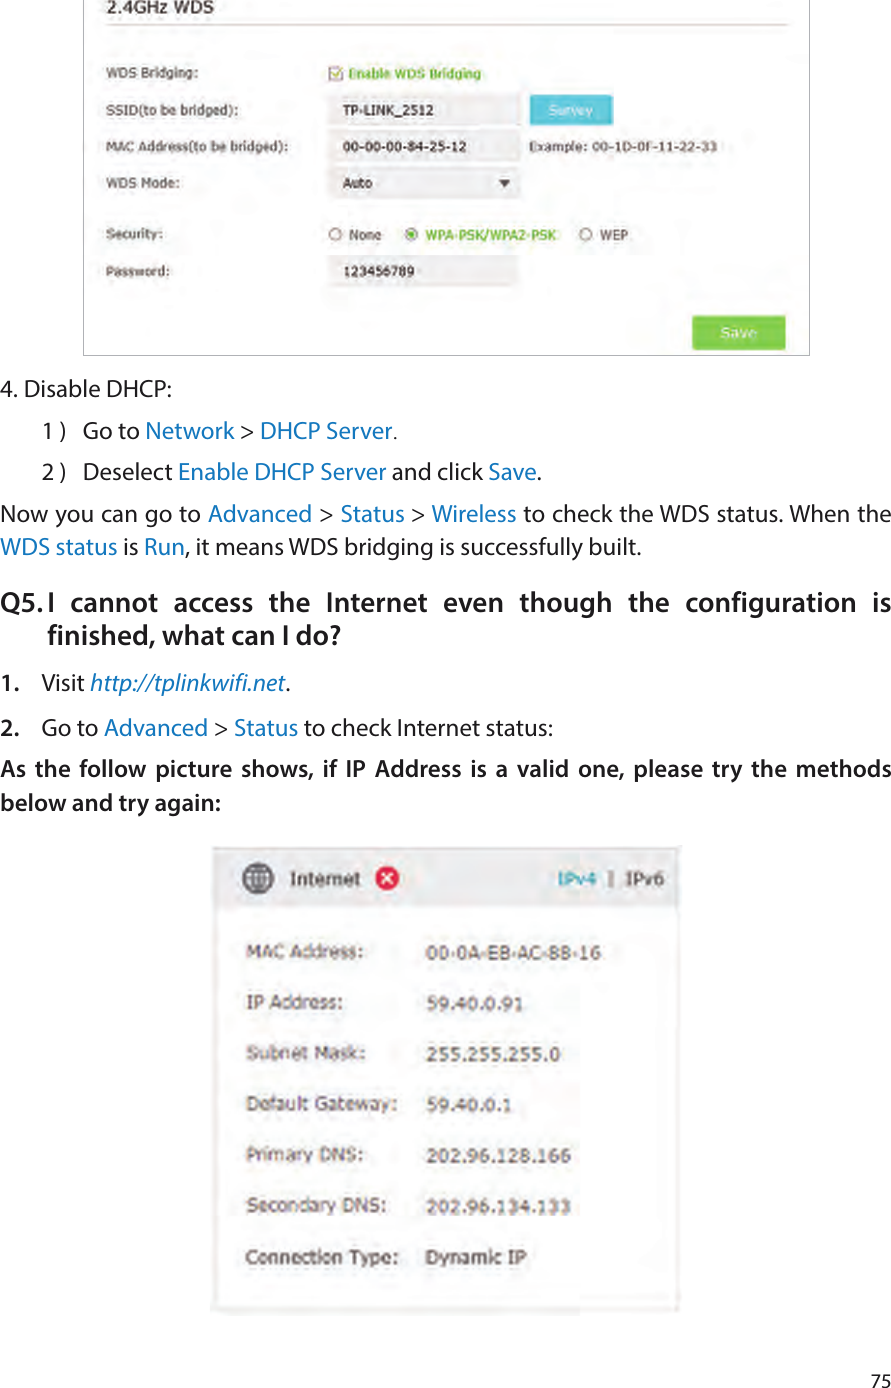 754. Disable DHCP:1 )  Go to Network &gt; DHCP Server.2 )  Deselect Enable DHCP Server and click Save.Now you can go to Advanced &gt; Status &gt; Wireless to check the WDS status. When the WDS status is Run, it means WDS bridging is successfully built.Q5. I cannot access the Internet even though the configuration is finished, what can I do?1.  Visit http://tplinkwifi.net.2.  Go to Advanced &gt; Status to check Internet status:As the follow picture shows, if IP Address is a valid one, please try the methods below and try again: